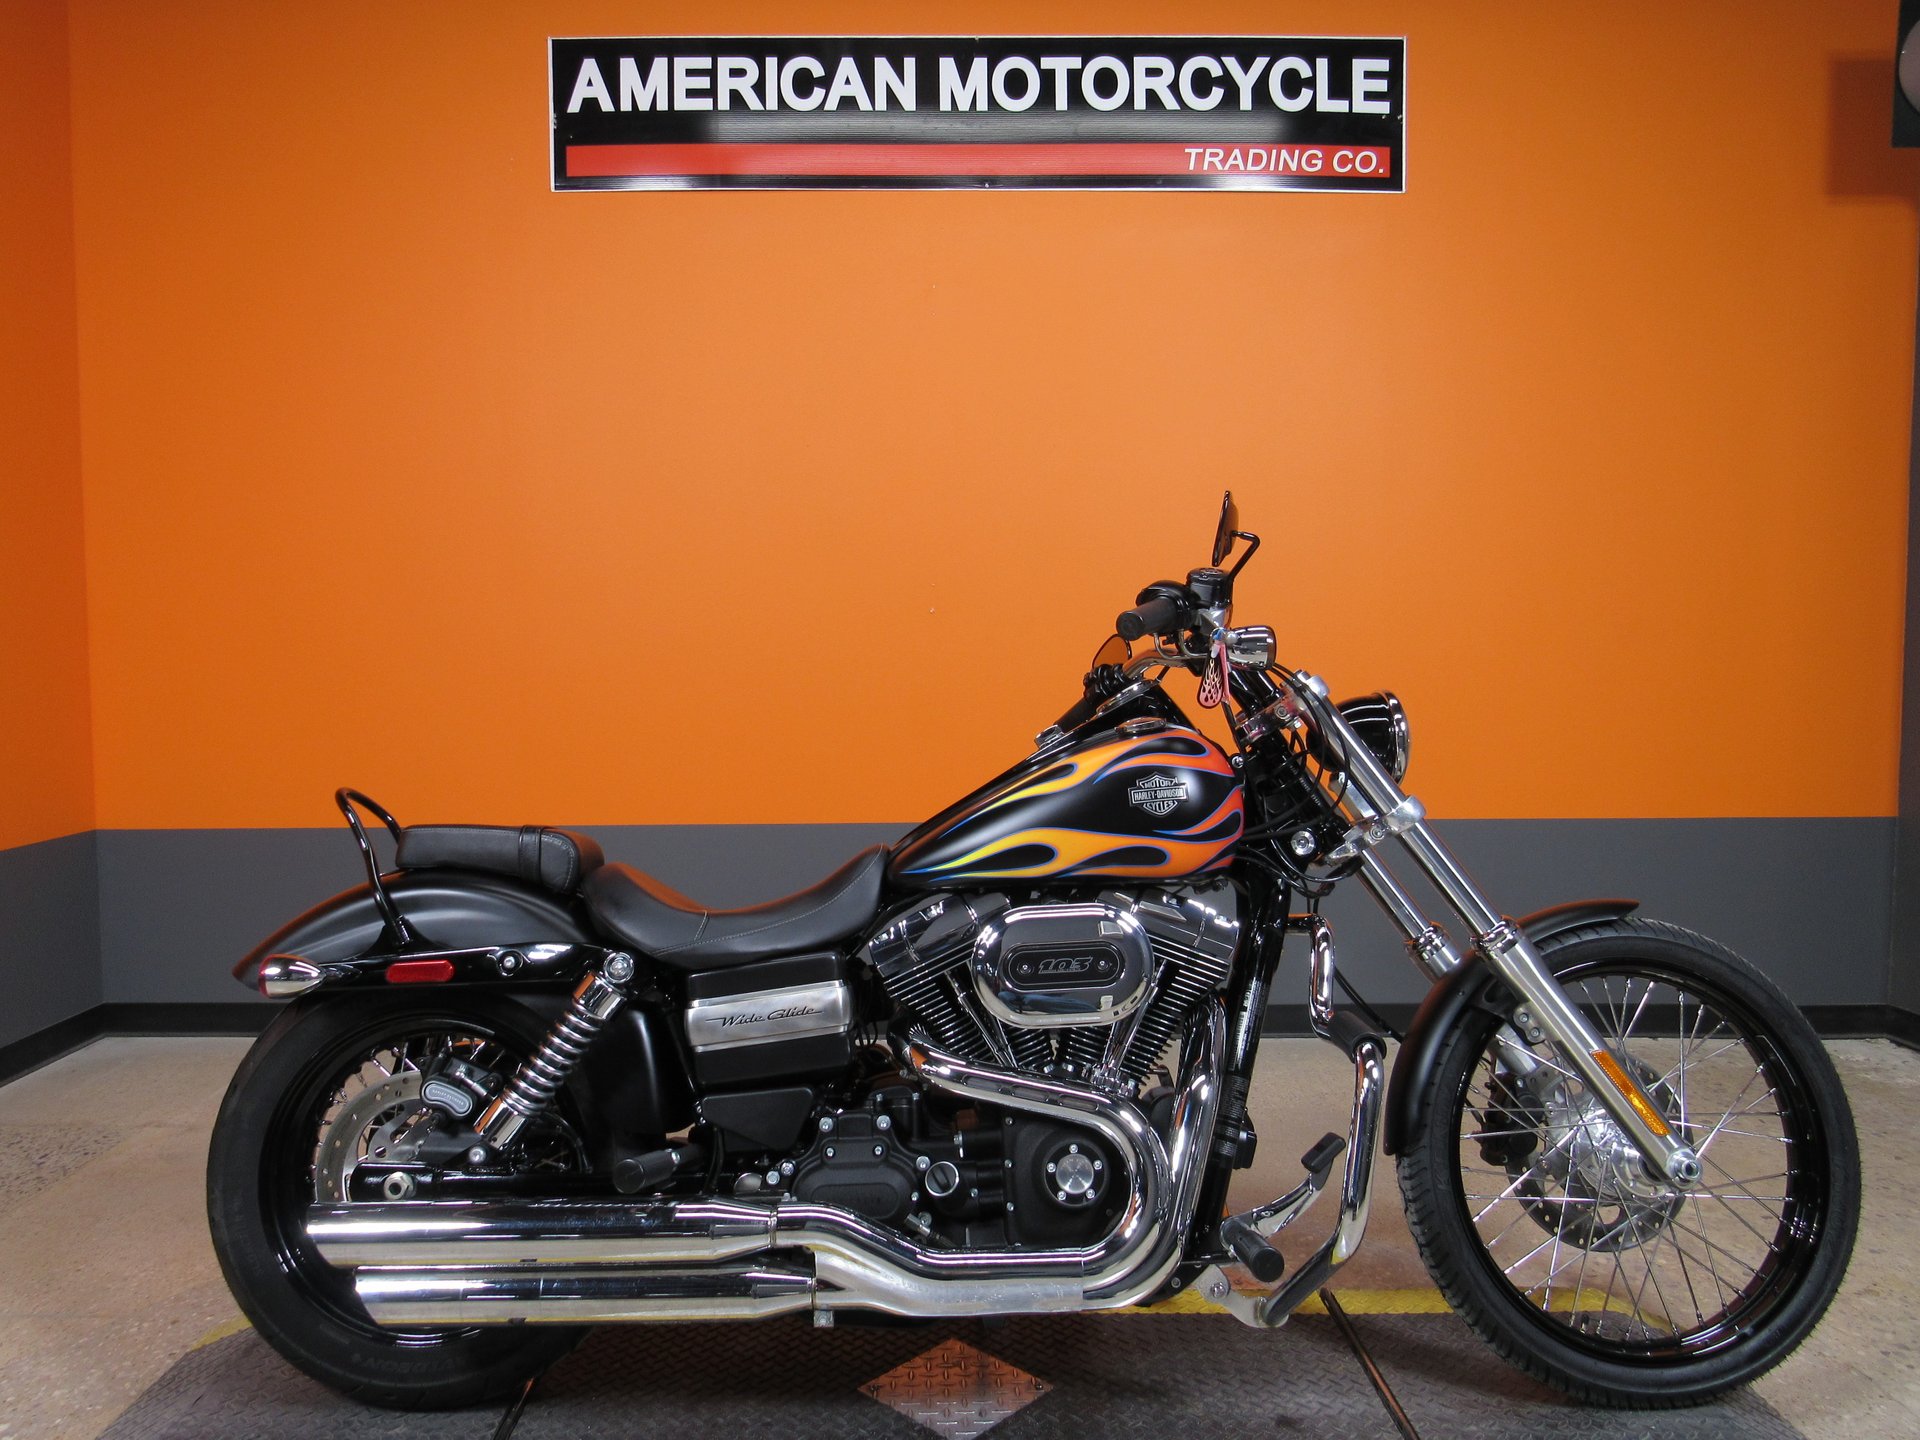 2016 Harley-Davidson Dyna Wide Glide | American Motorcycle Trading ...